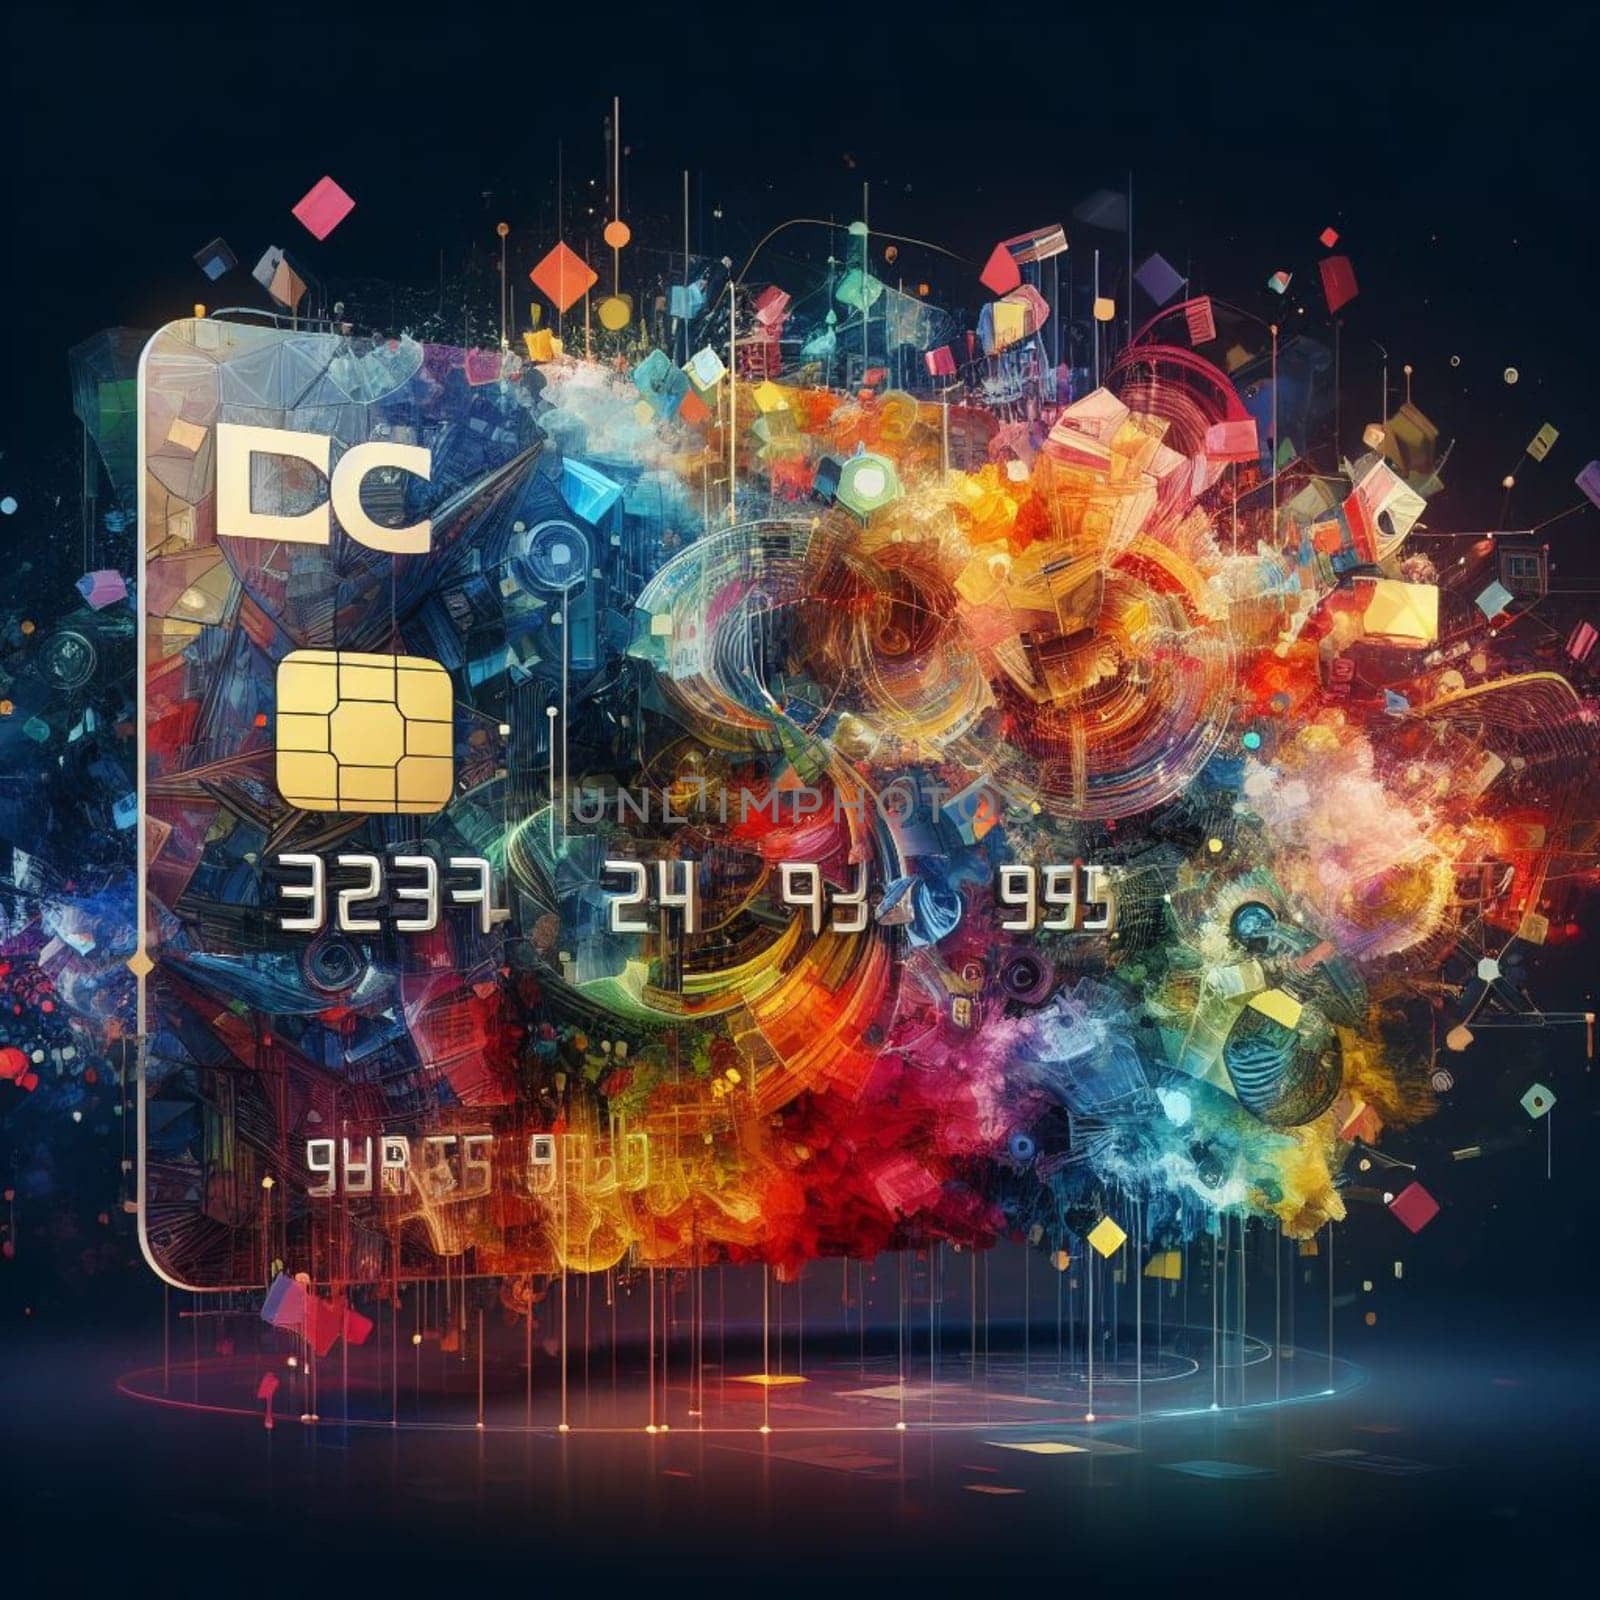 cbdc virtual currency and crypto digital money credit debit card concept graphic by verbano